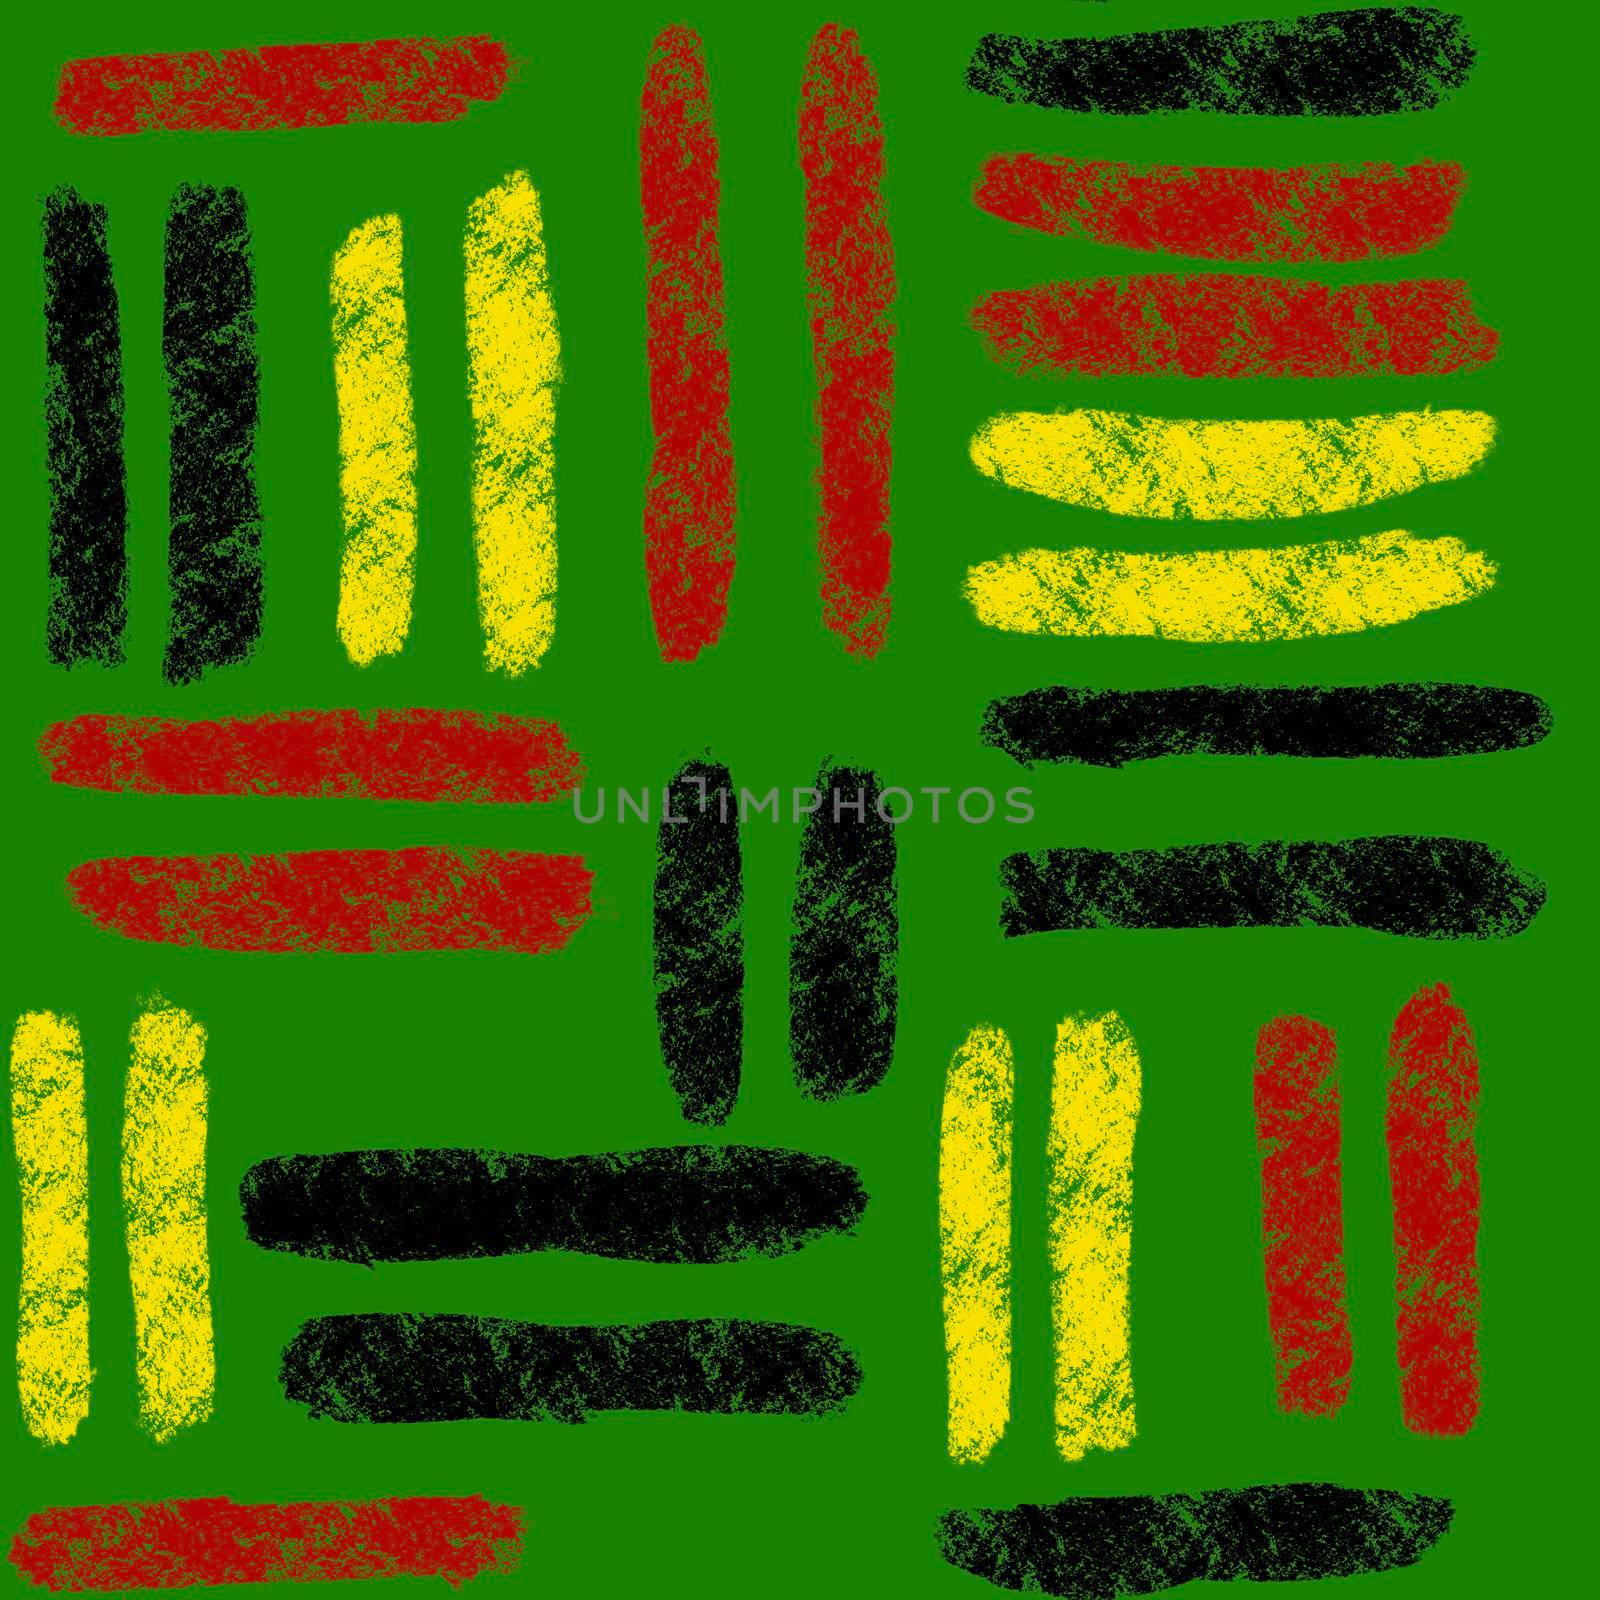 Hand drawn seamless pattern with african geometric ornament design print, Juneteenth freedom 1865 fabric, yellow green red black abstract shapes kente cloth, ethnic background